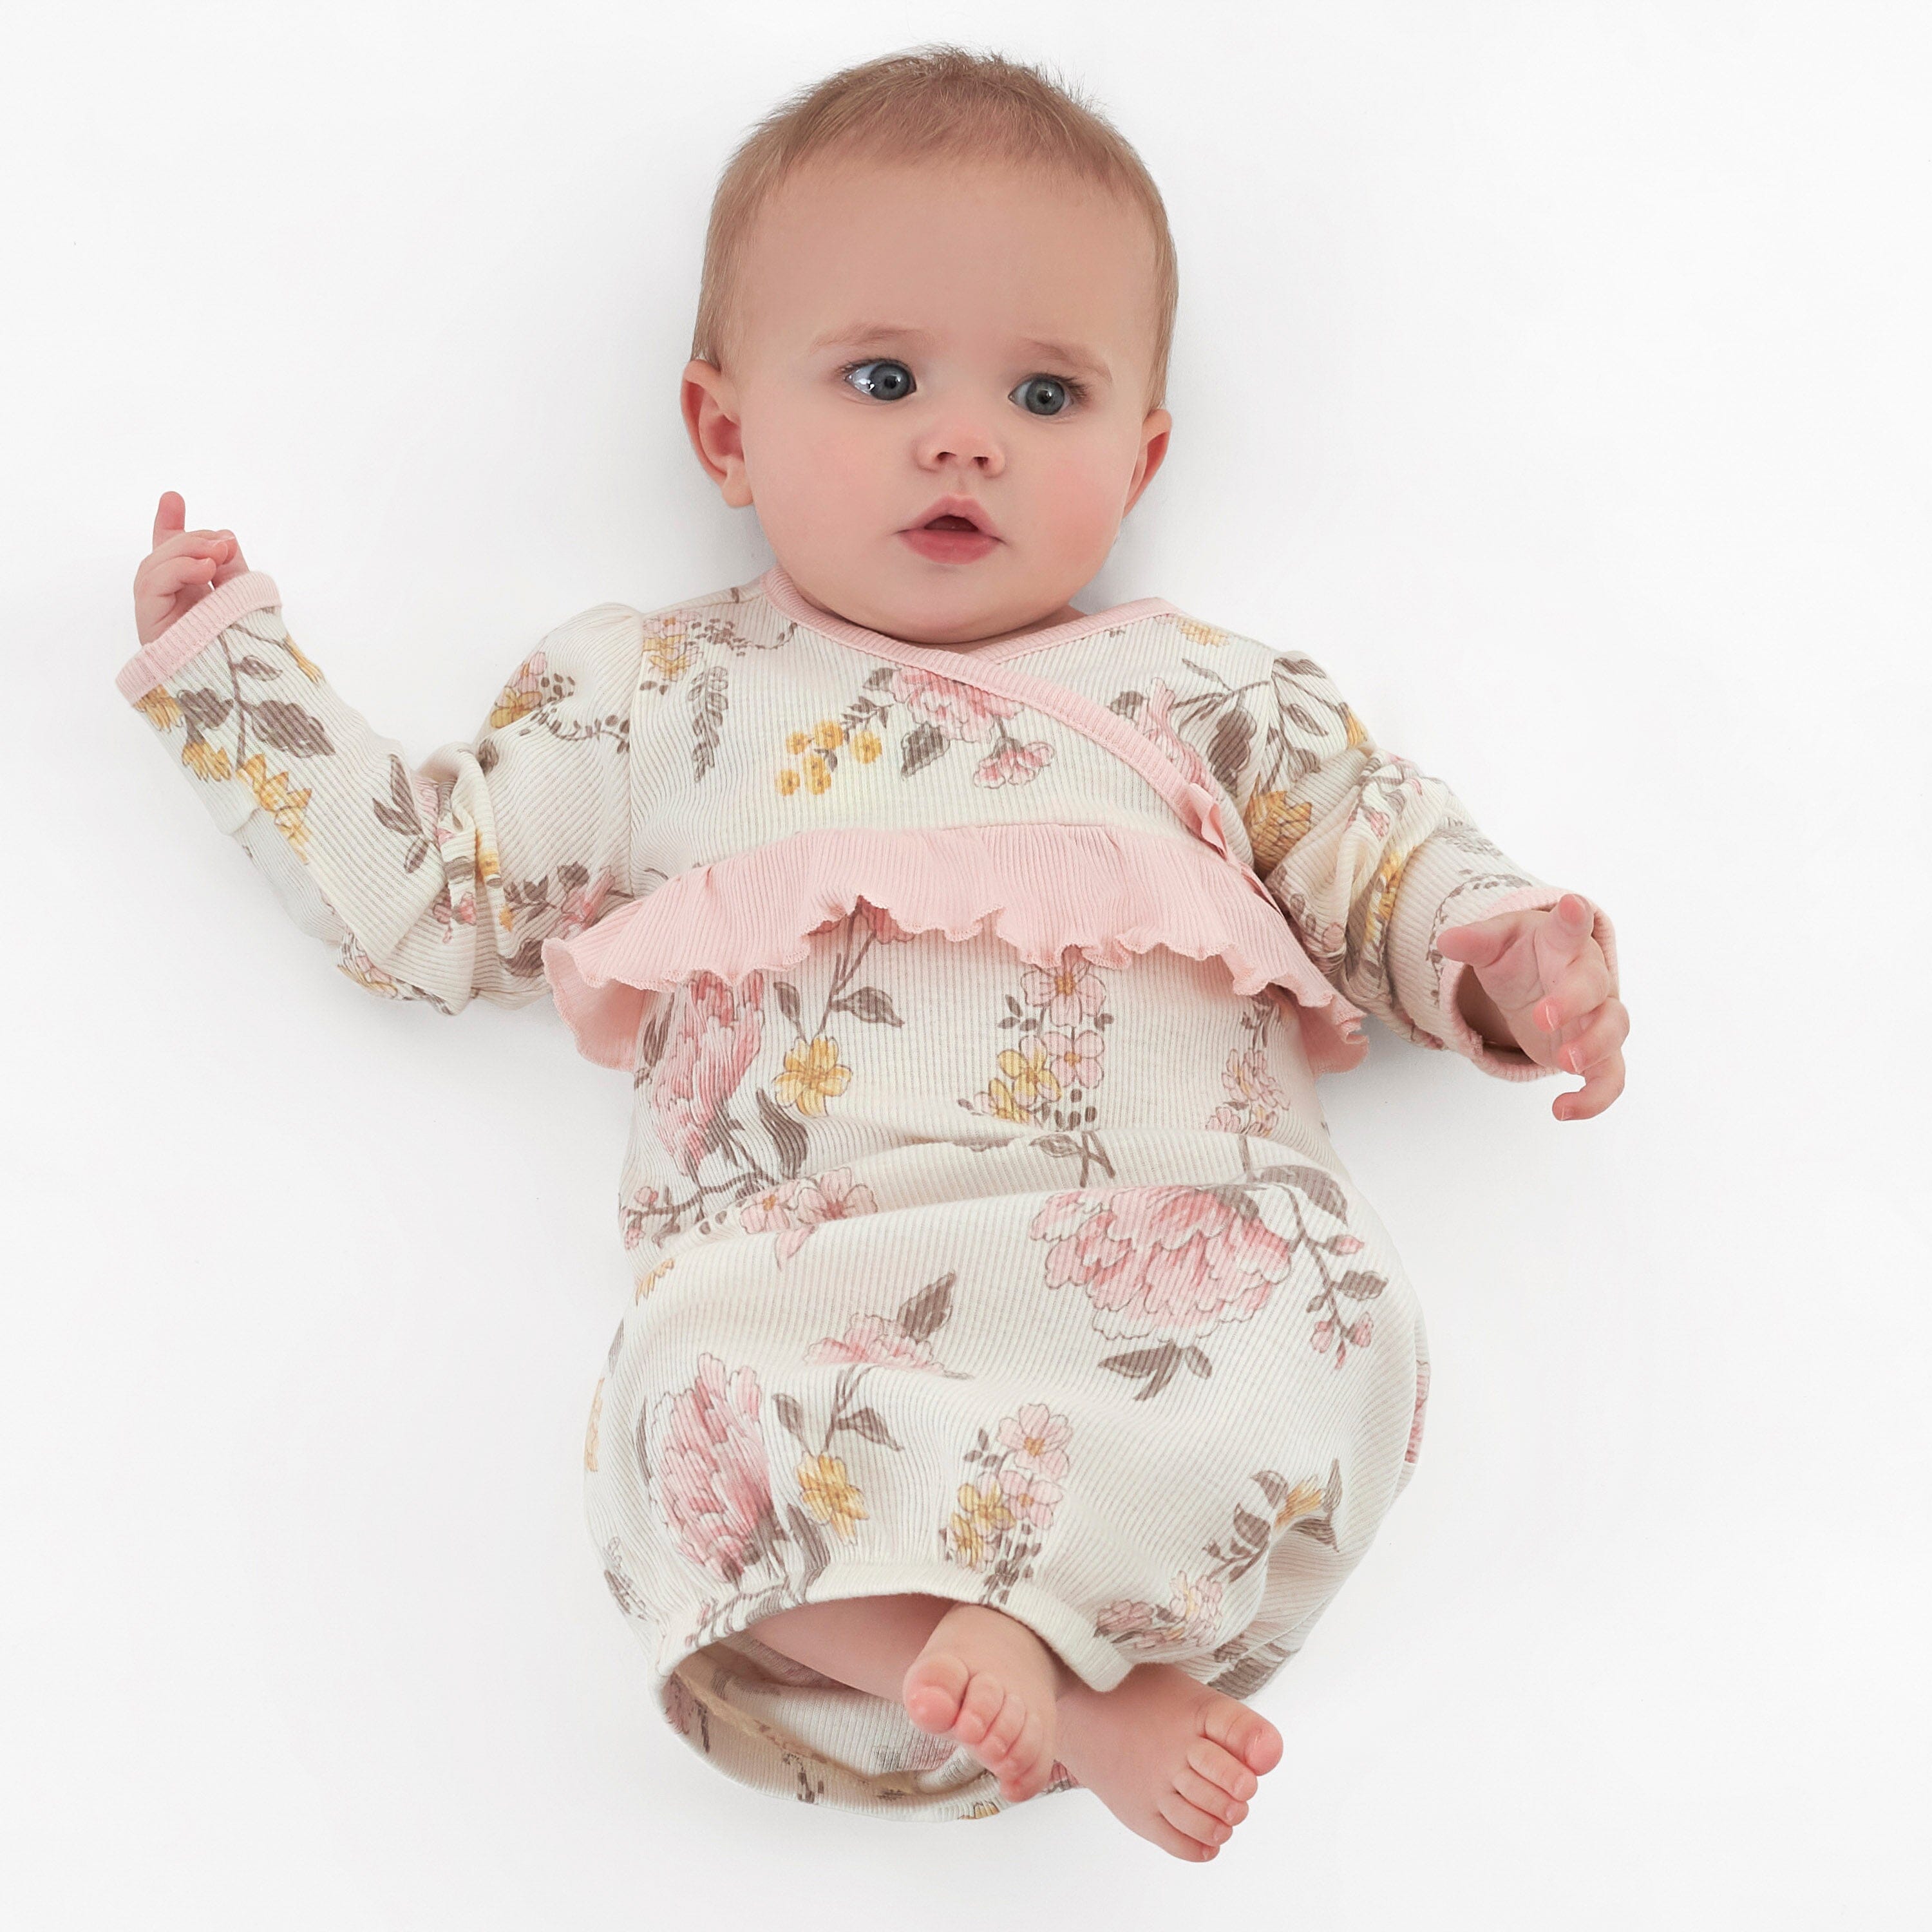 Cotton Knit Pajama Gown - Tiny Triangles Shimmer, Pink – SwaddleDesigns